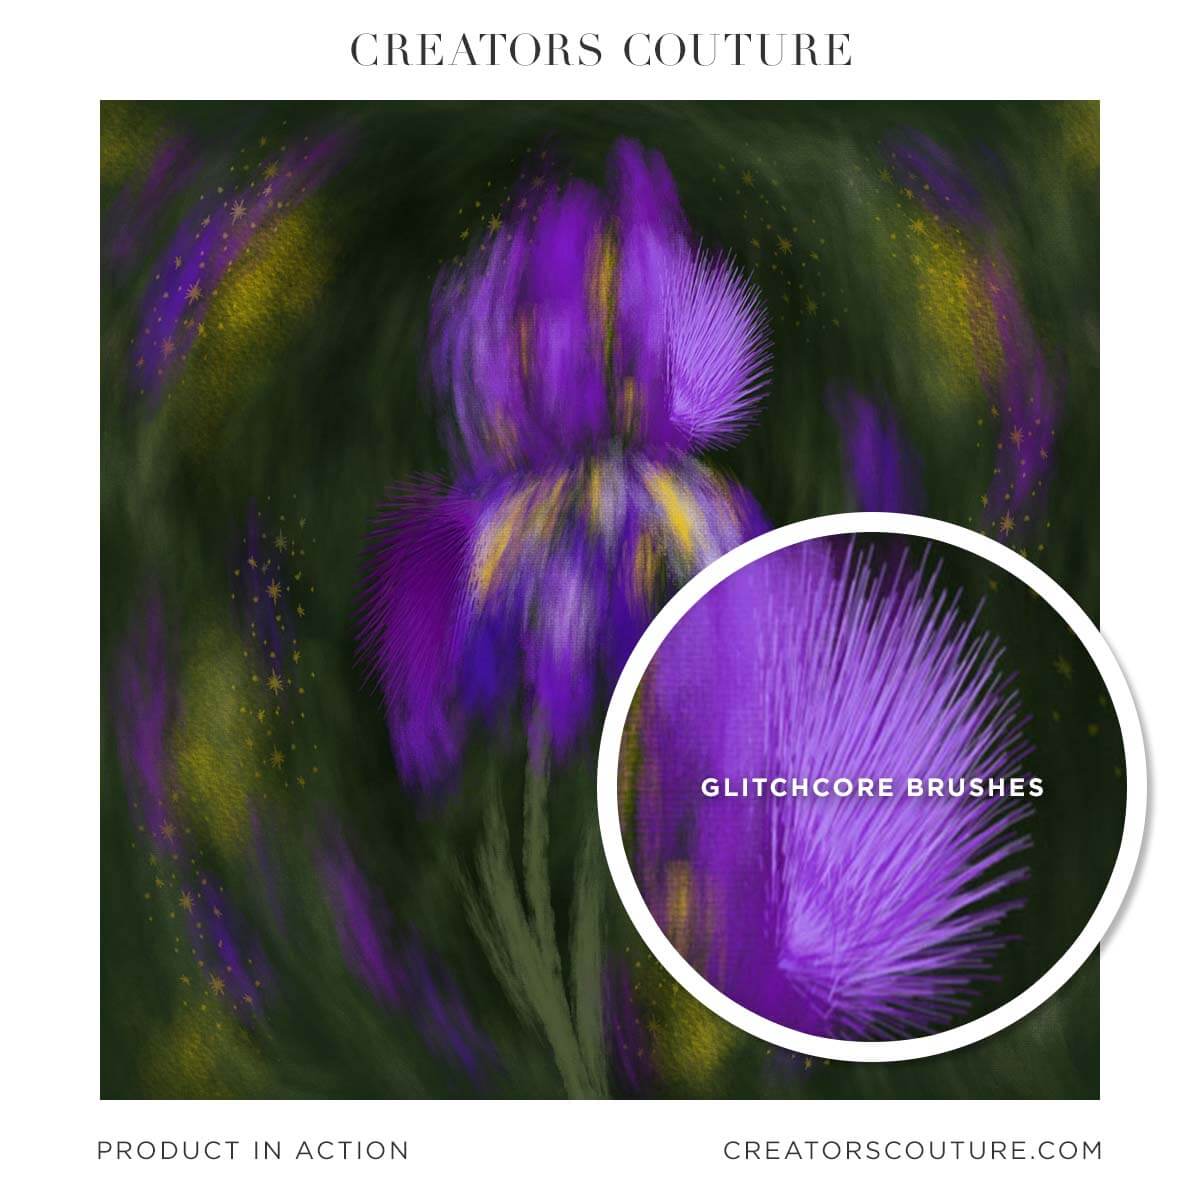 Impressionist Iris illustration with a purple flower and glitch effect brushes accenting the flower leaves 